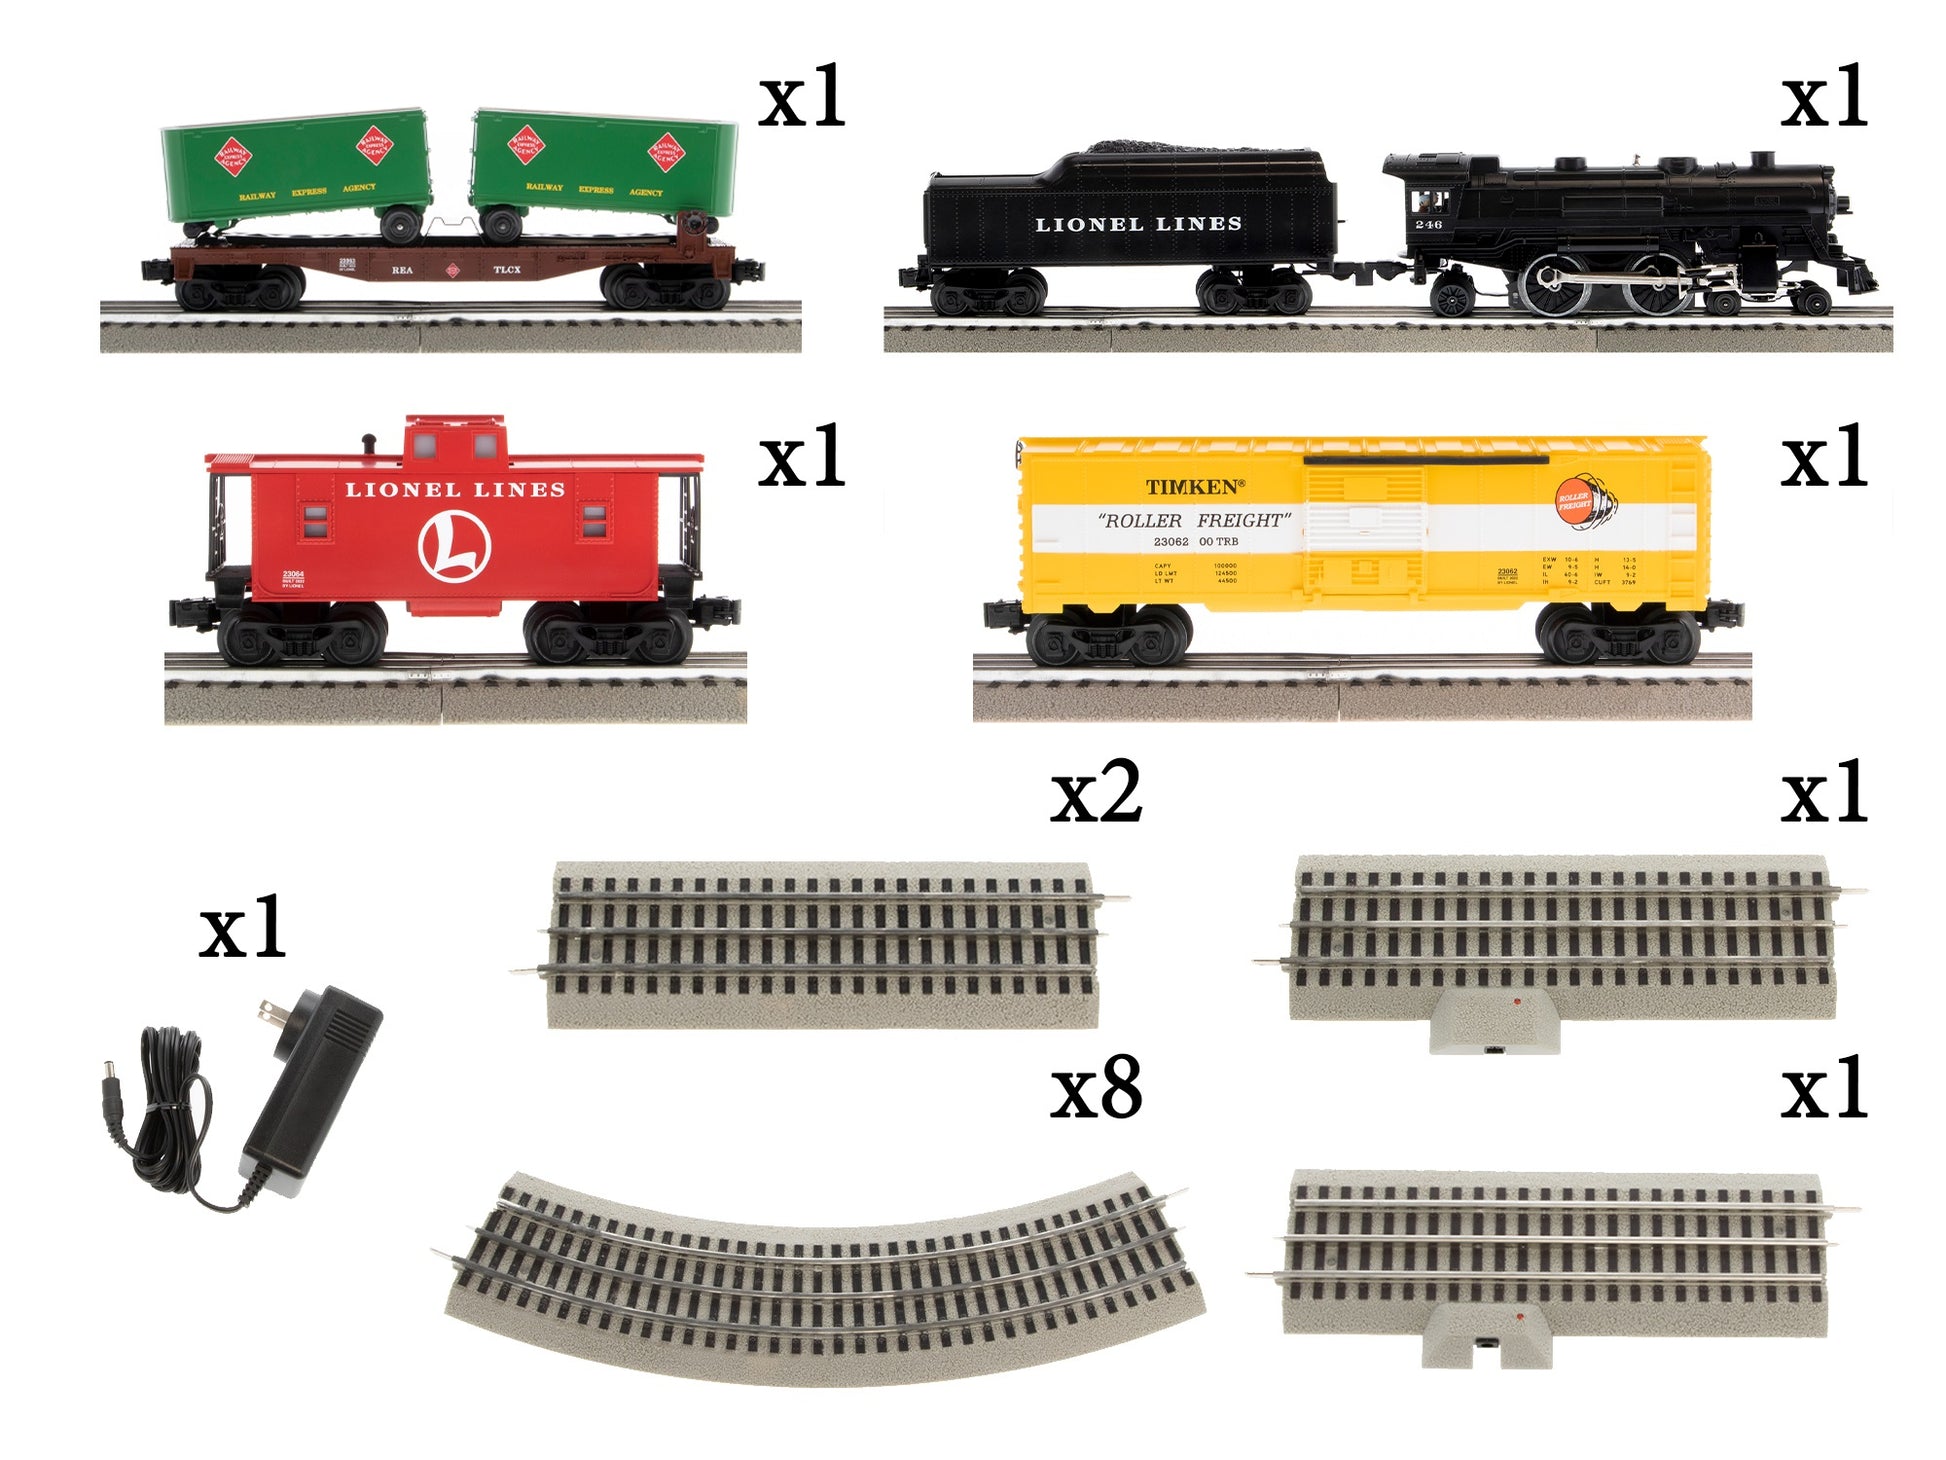 All that is included with Model Train Set O Scale Lionel Lines Mixed Freight LionChief Bluetooth 5.0.